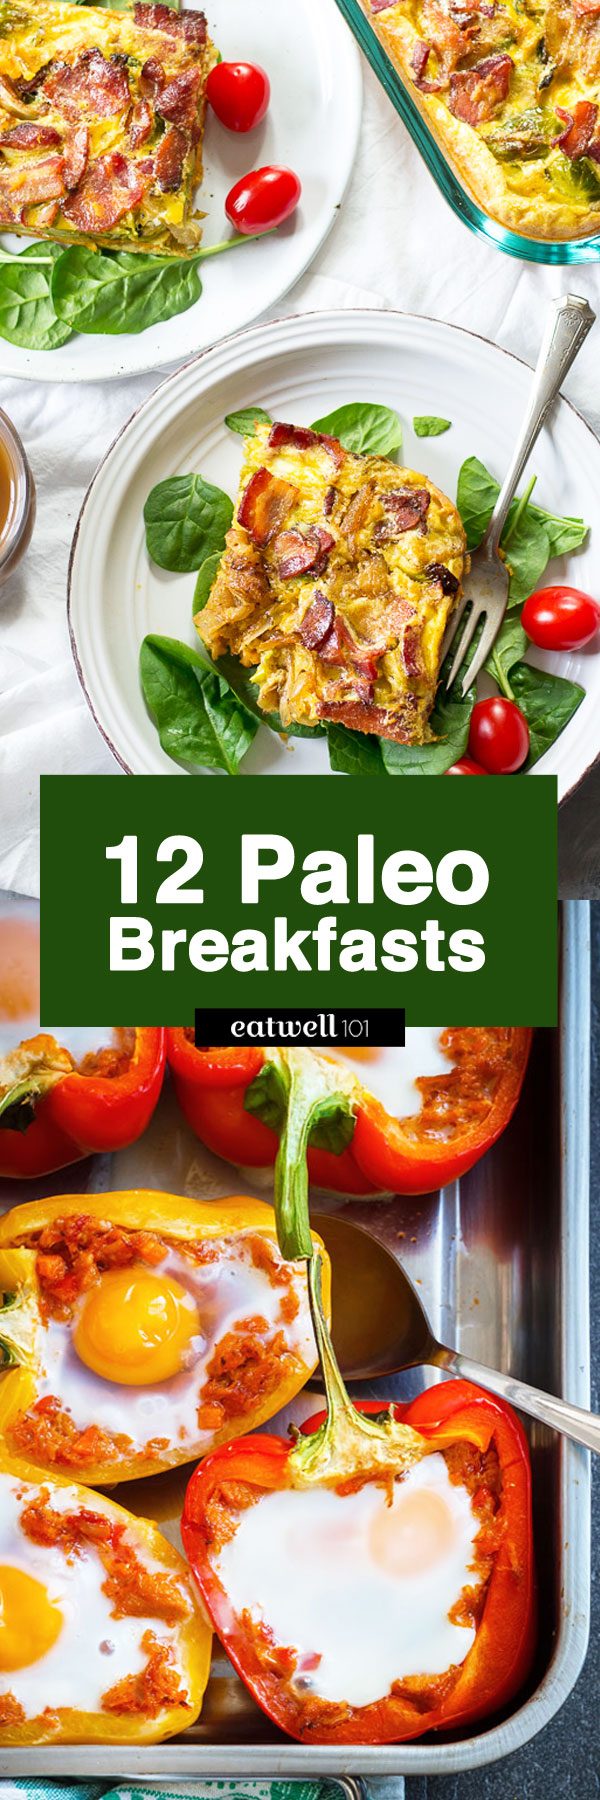 12 Paleo Breakfasts That'll Jump Start Your Morning - #paleo #breakfast #recipes #eatwell101 - These paleo breakfast recipes will help you wake up in great shape! Discover our delicious paleo breakfasts.